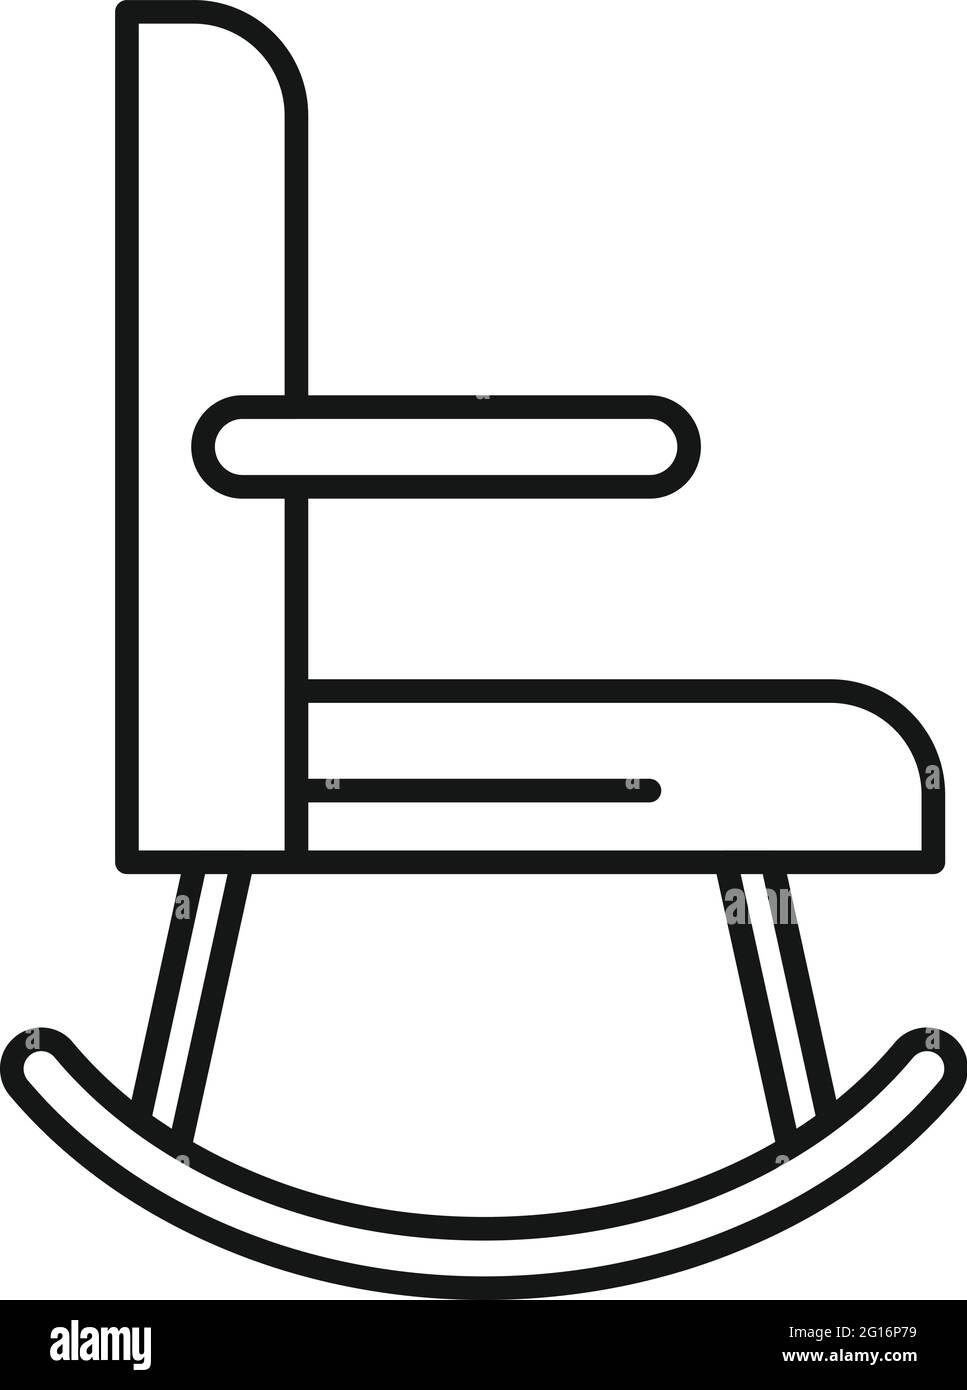 Rocking Chairs Dimensions  Drawings  Dimensionscom